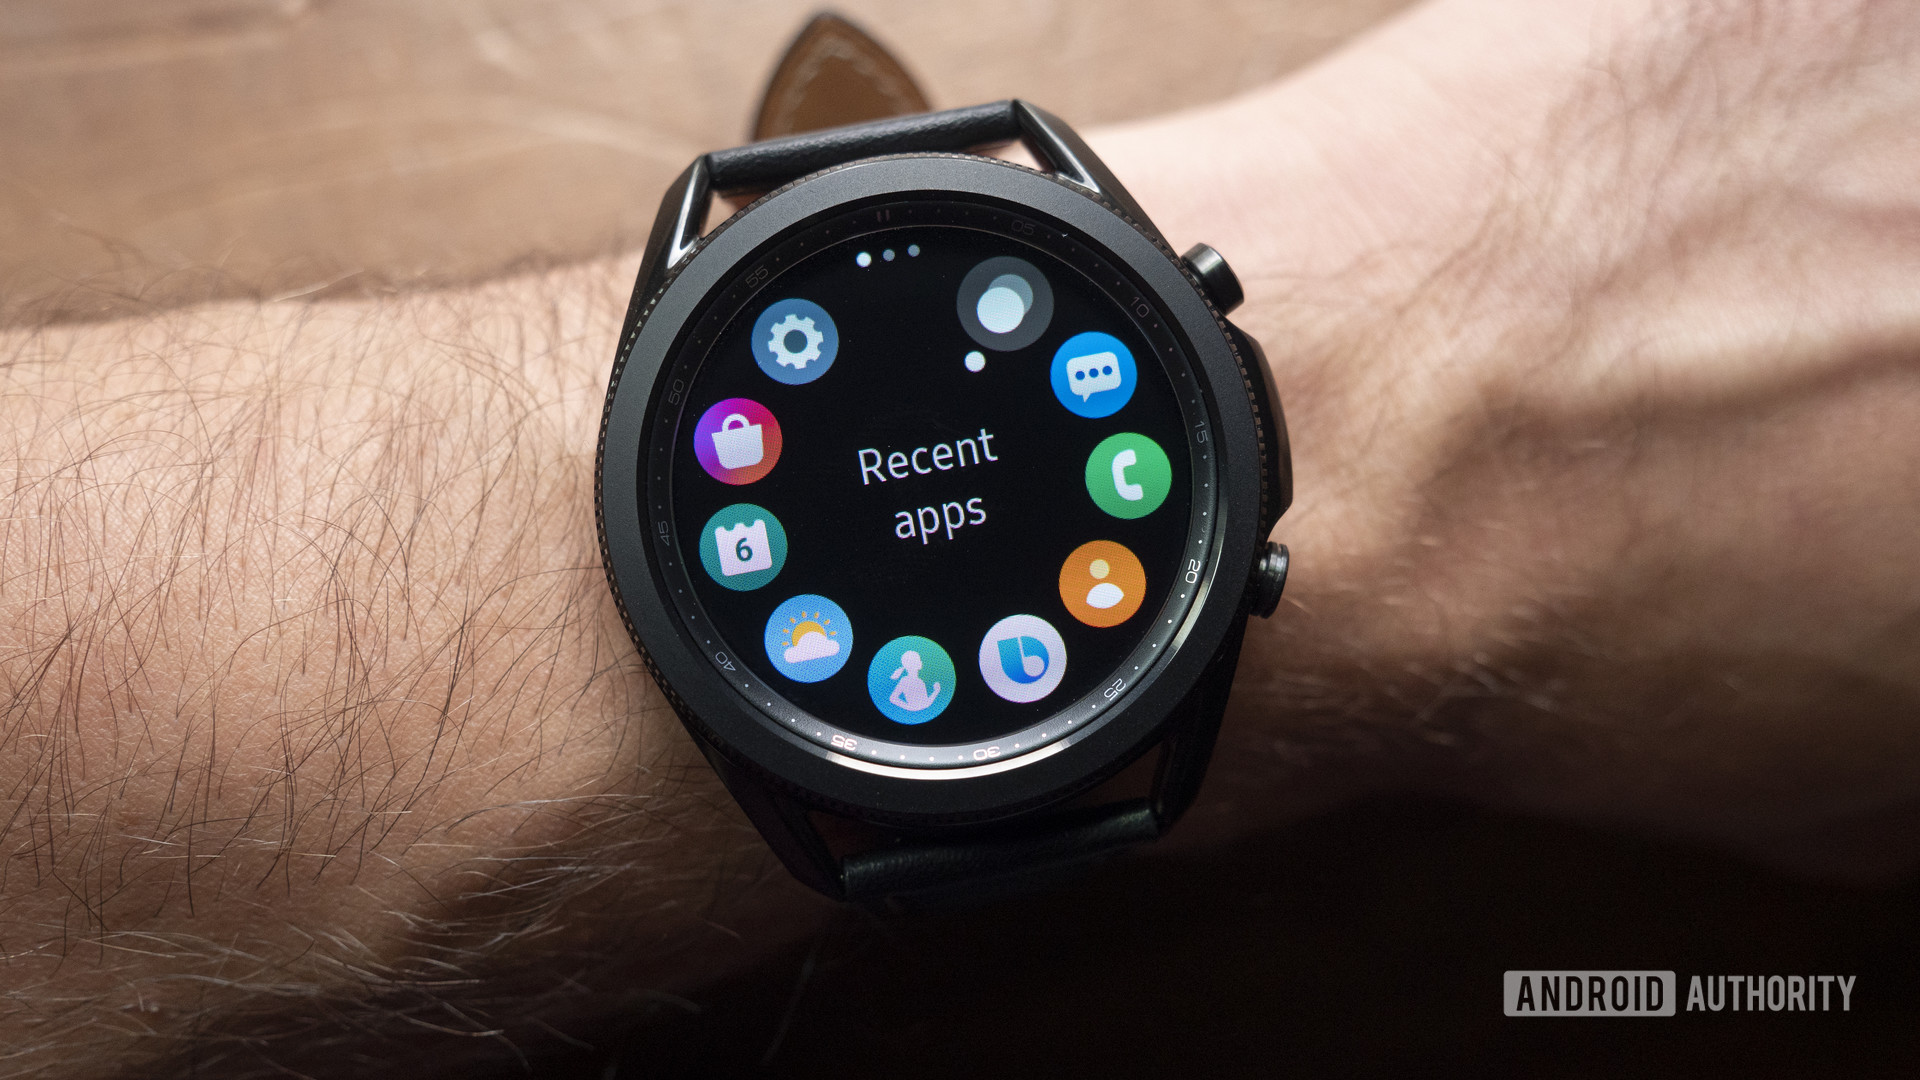 A Samsung Galaxy Watch 3 on a user's wrist displays the device's apps.